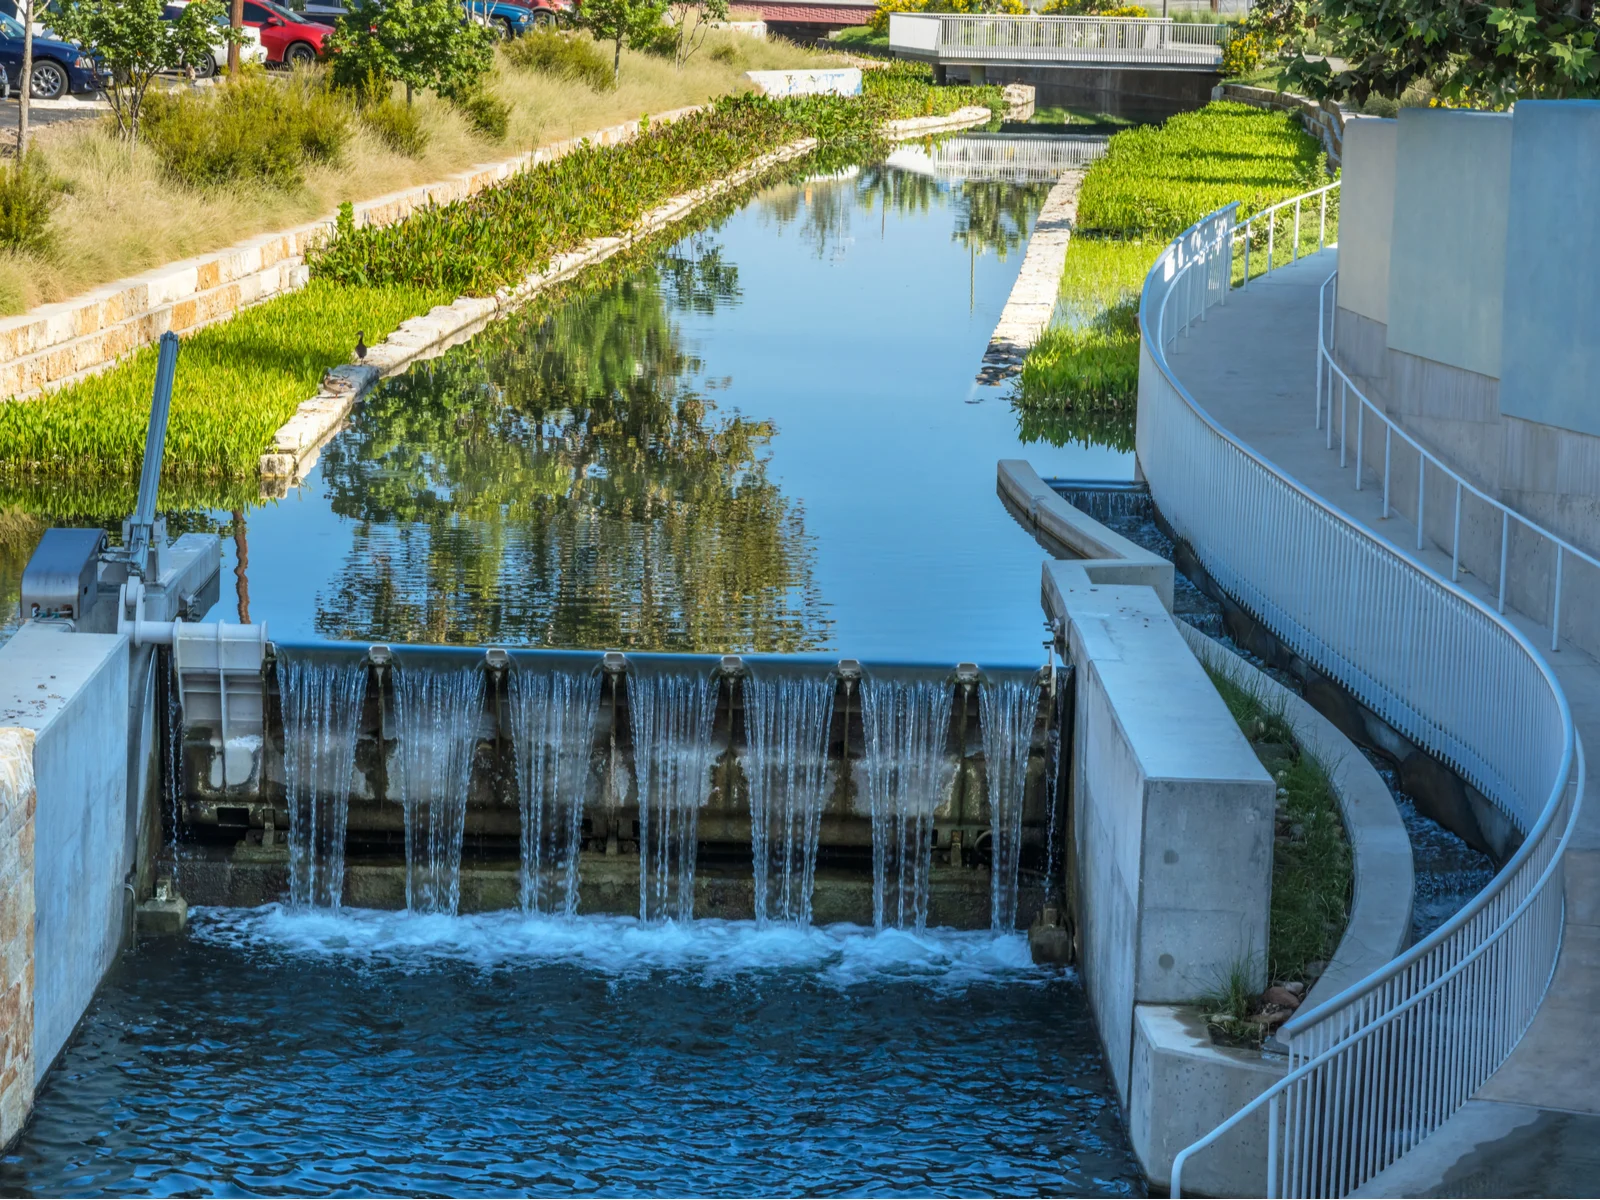 One of our picks for the best things to do in San Antonio, the Creek River Walk